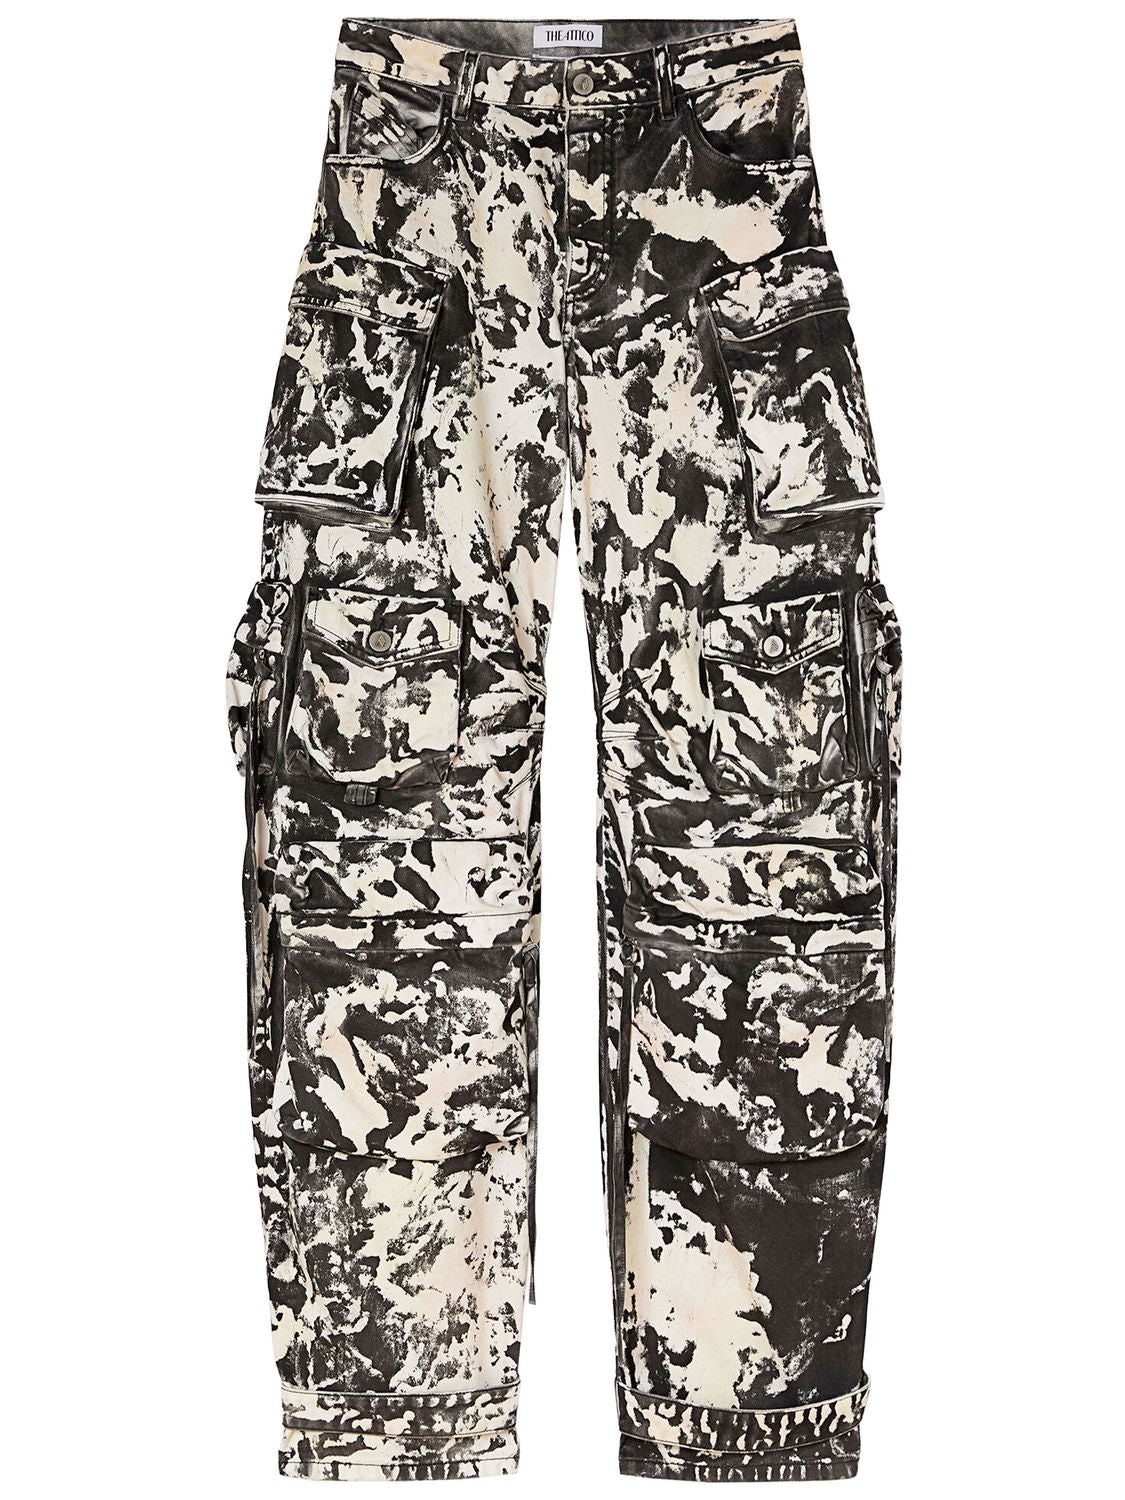 THE ATTICO Fern Cargo Pants - White, Black, and Pink Denim - Oversized Fit